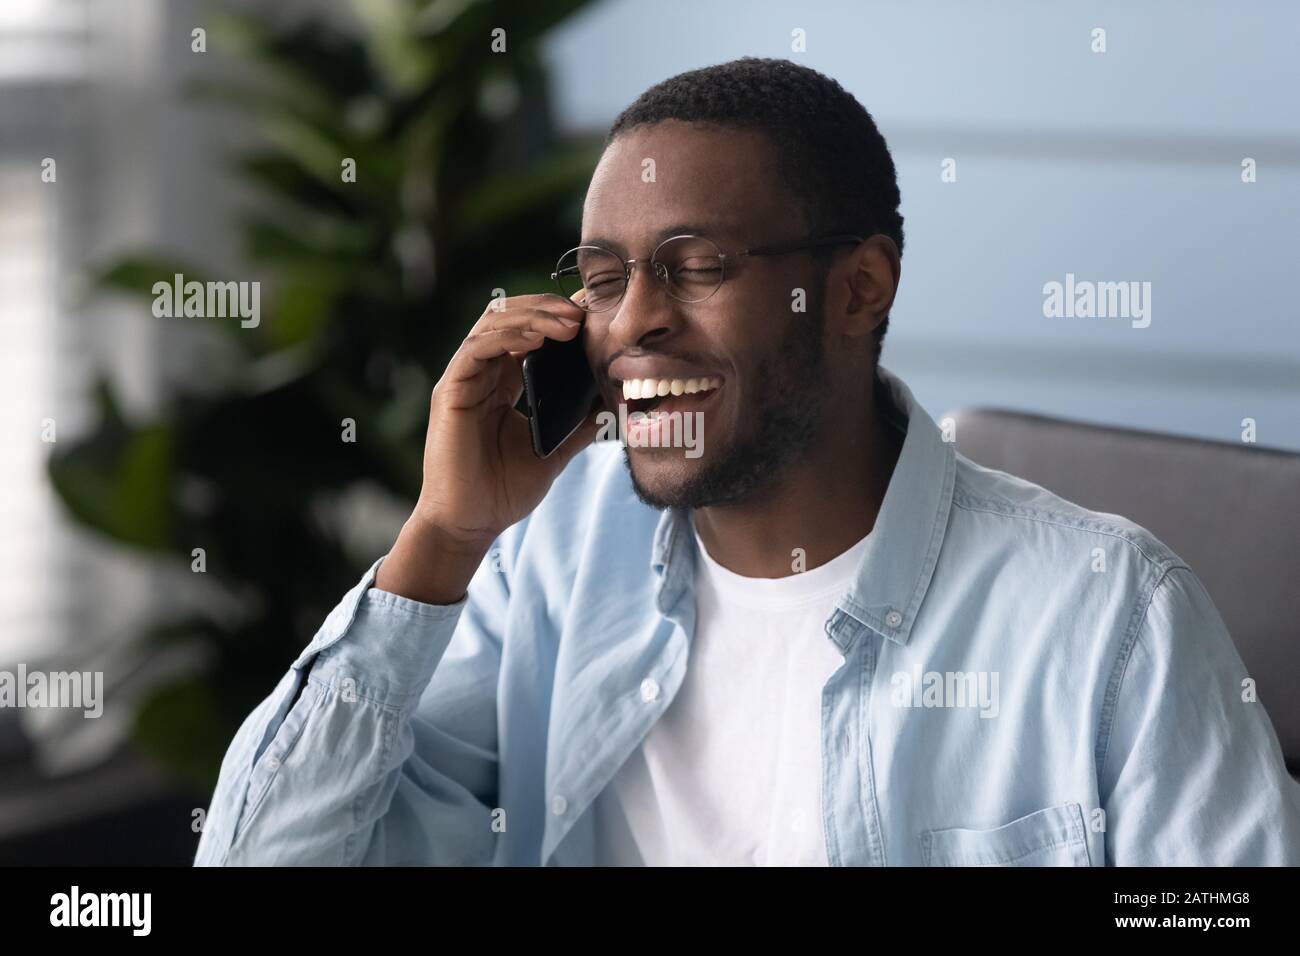 African ethnicity guy laughing during smartphone conversation seated indoors Stock Photo